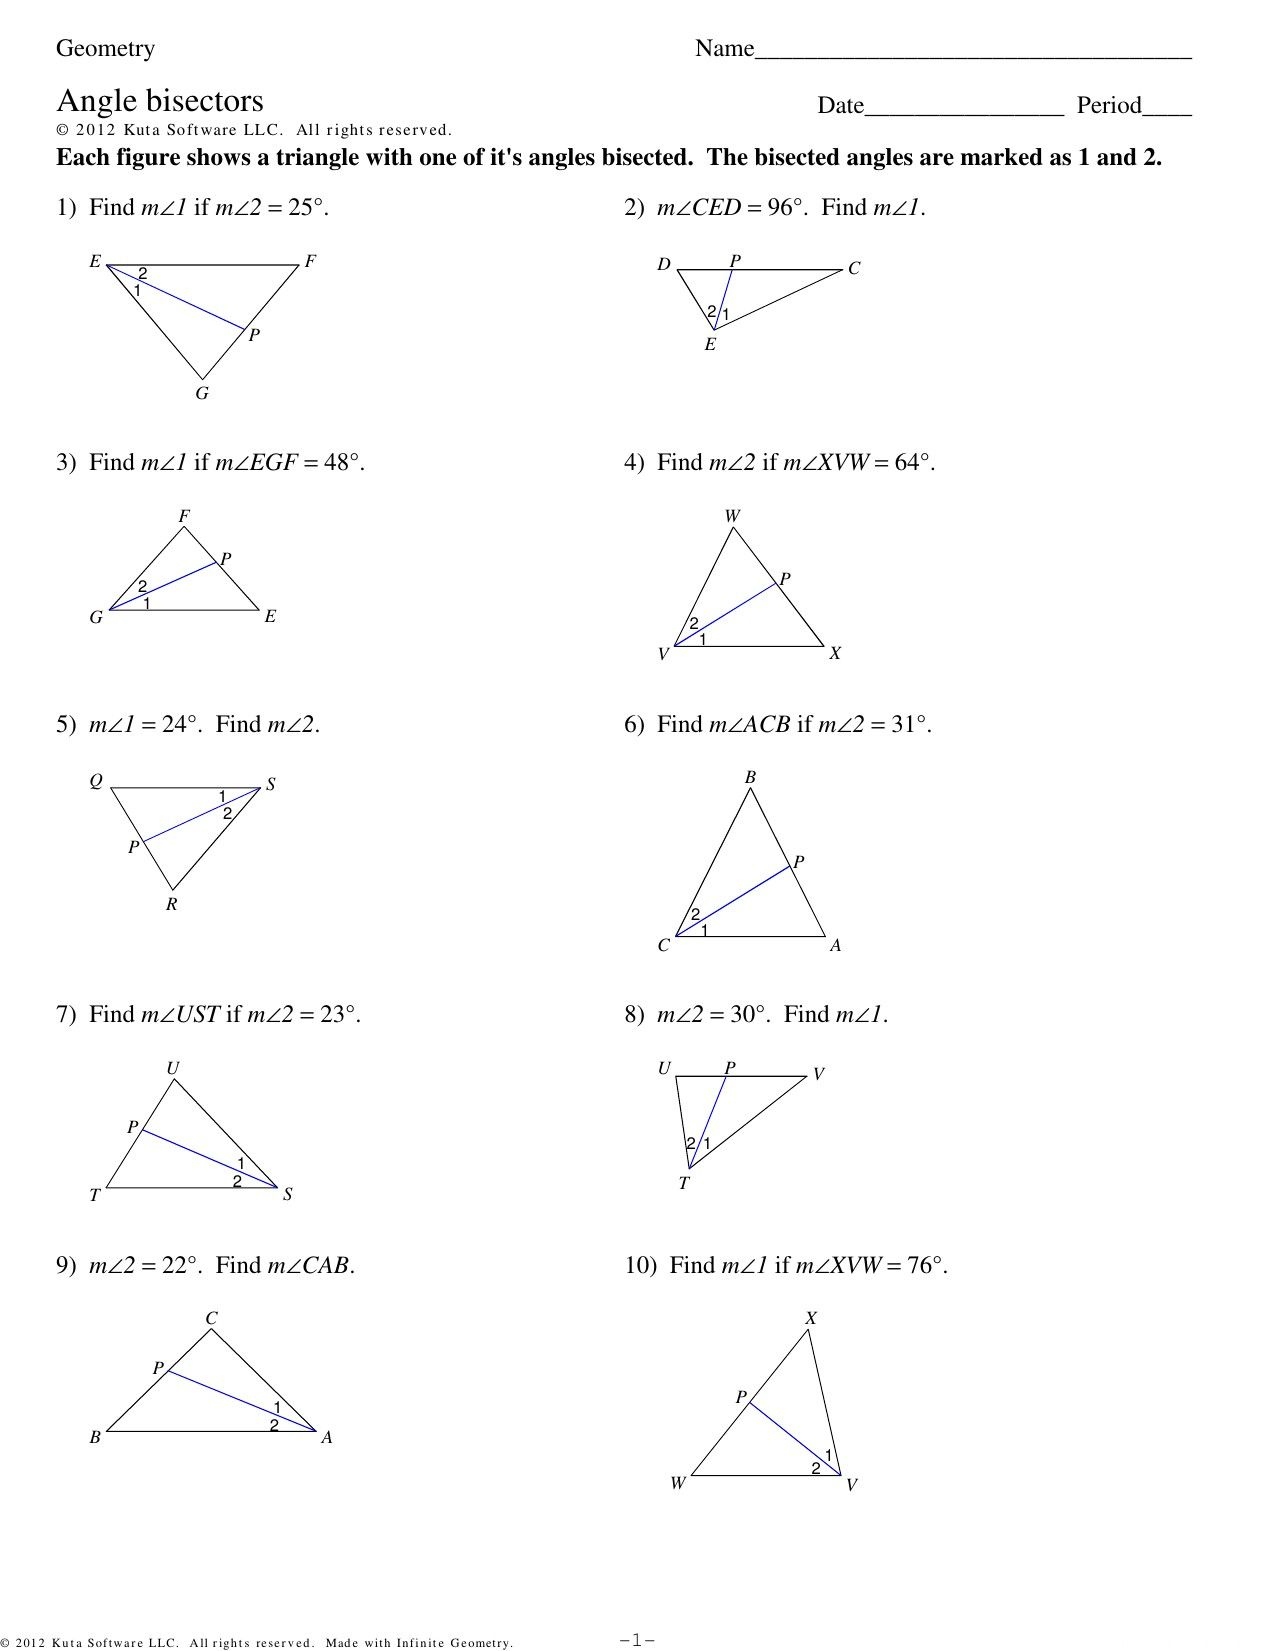 Triangle Angle Bisector Proportionality Theorem Worksheet 1240